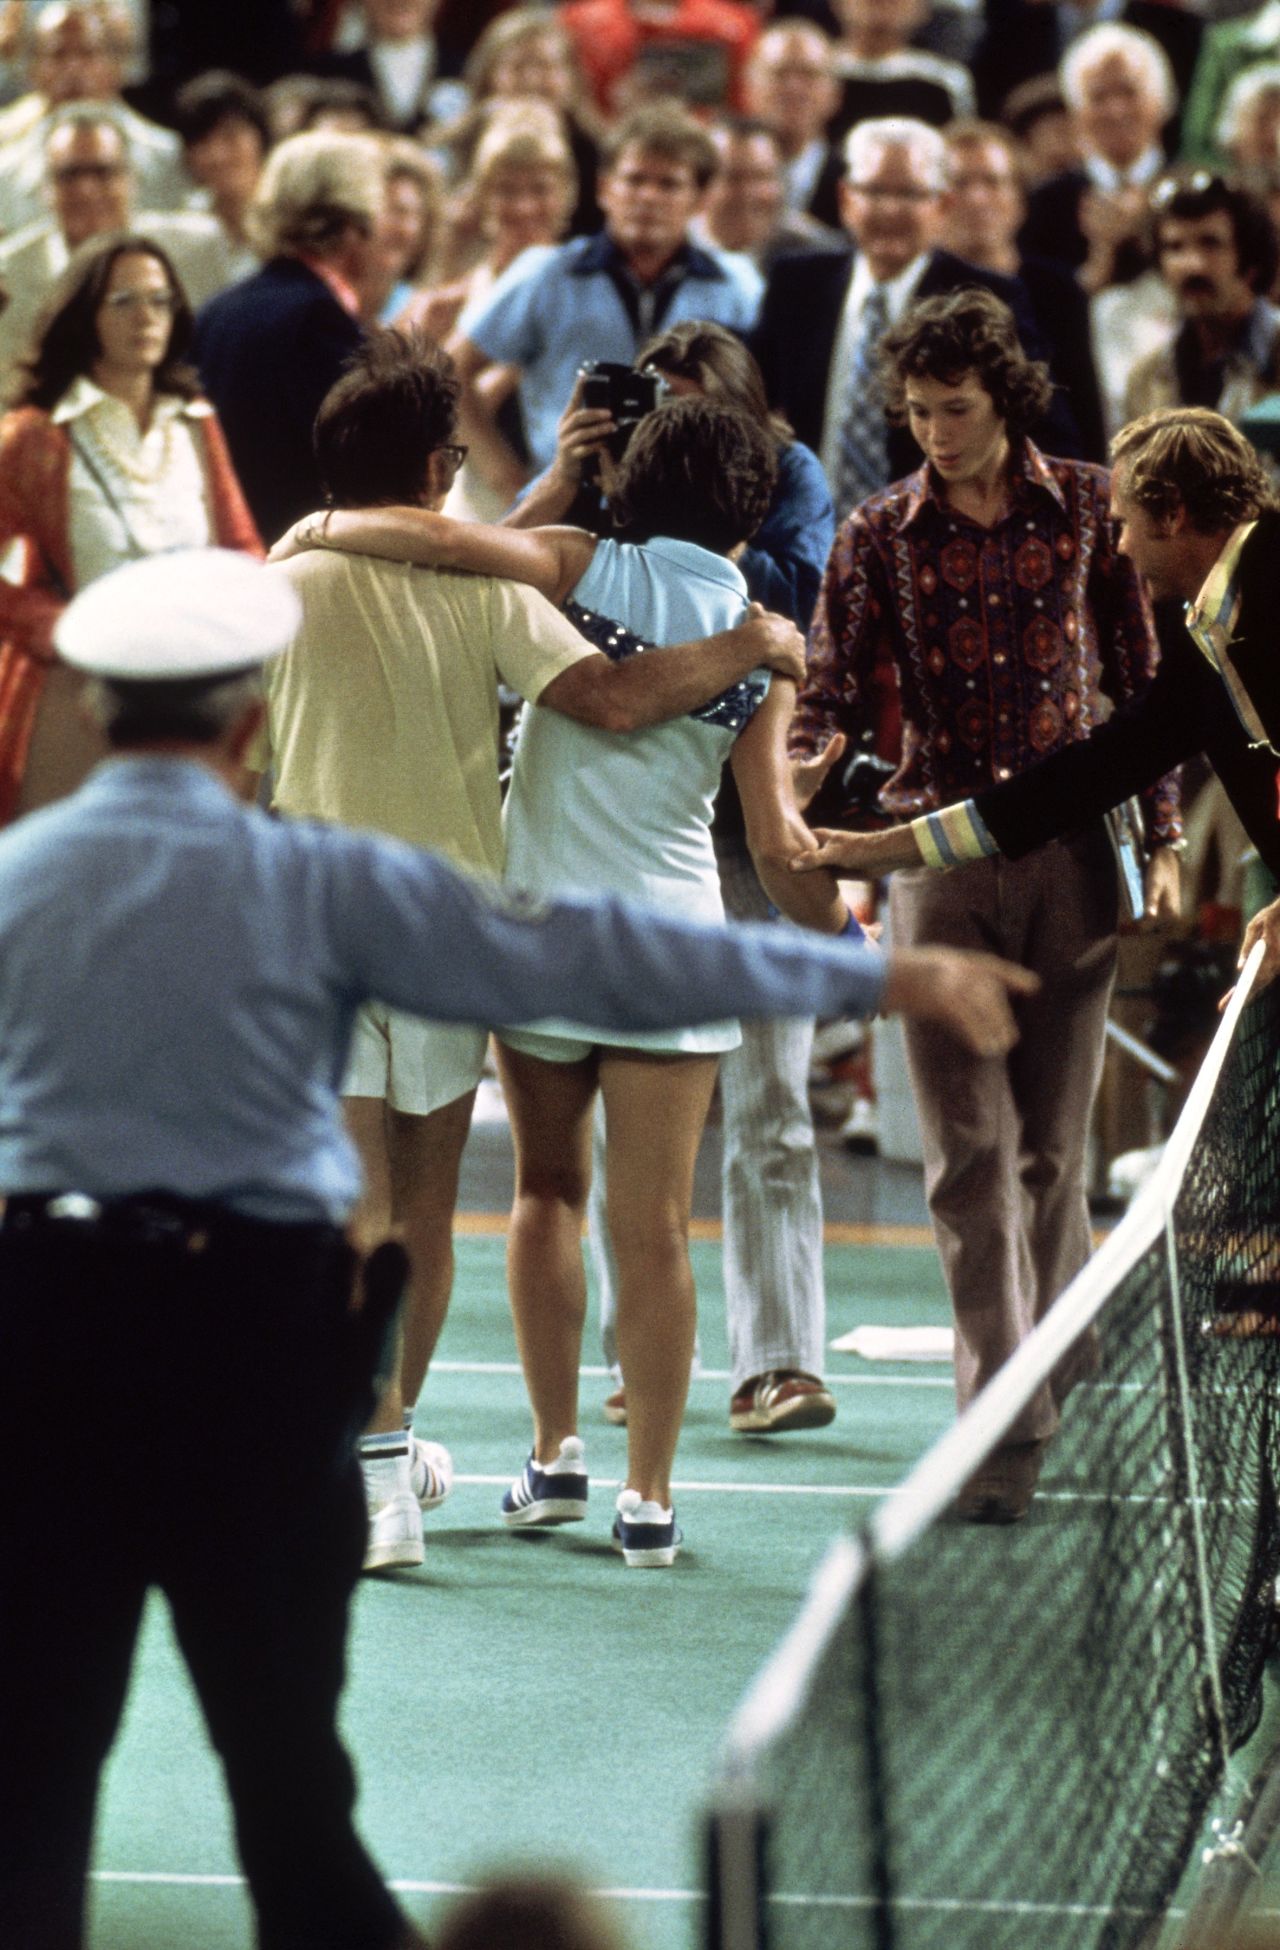 Riggs and King embrace after the match at Houston in 1973. King said had she not won she would have "set us back 50 years."